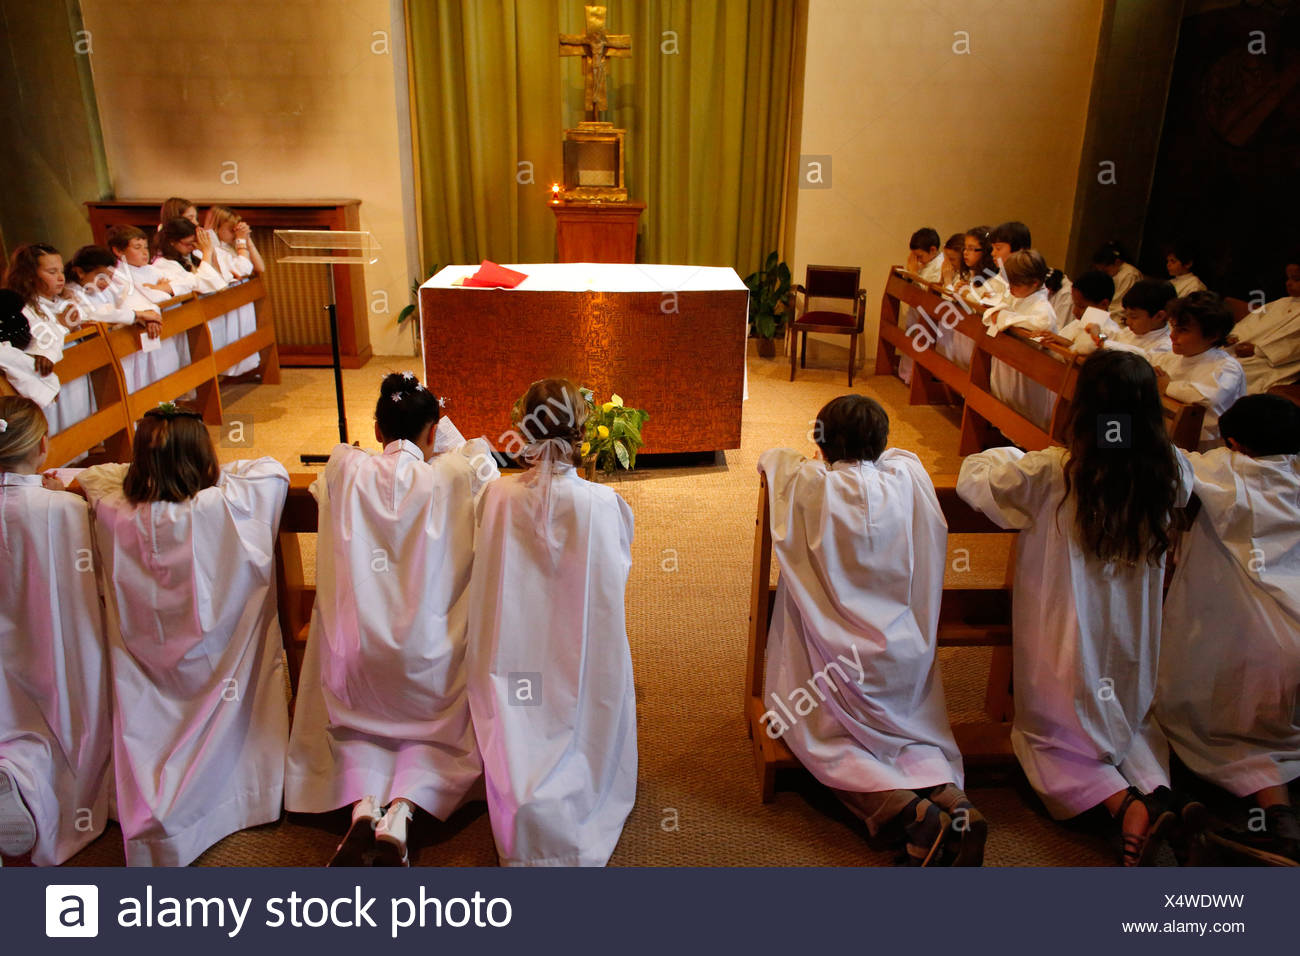 People Praying In Church High Resolution Stock Photography And